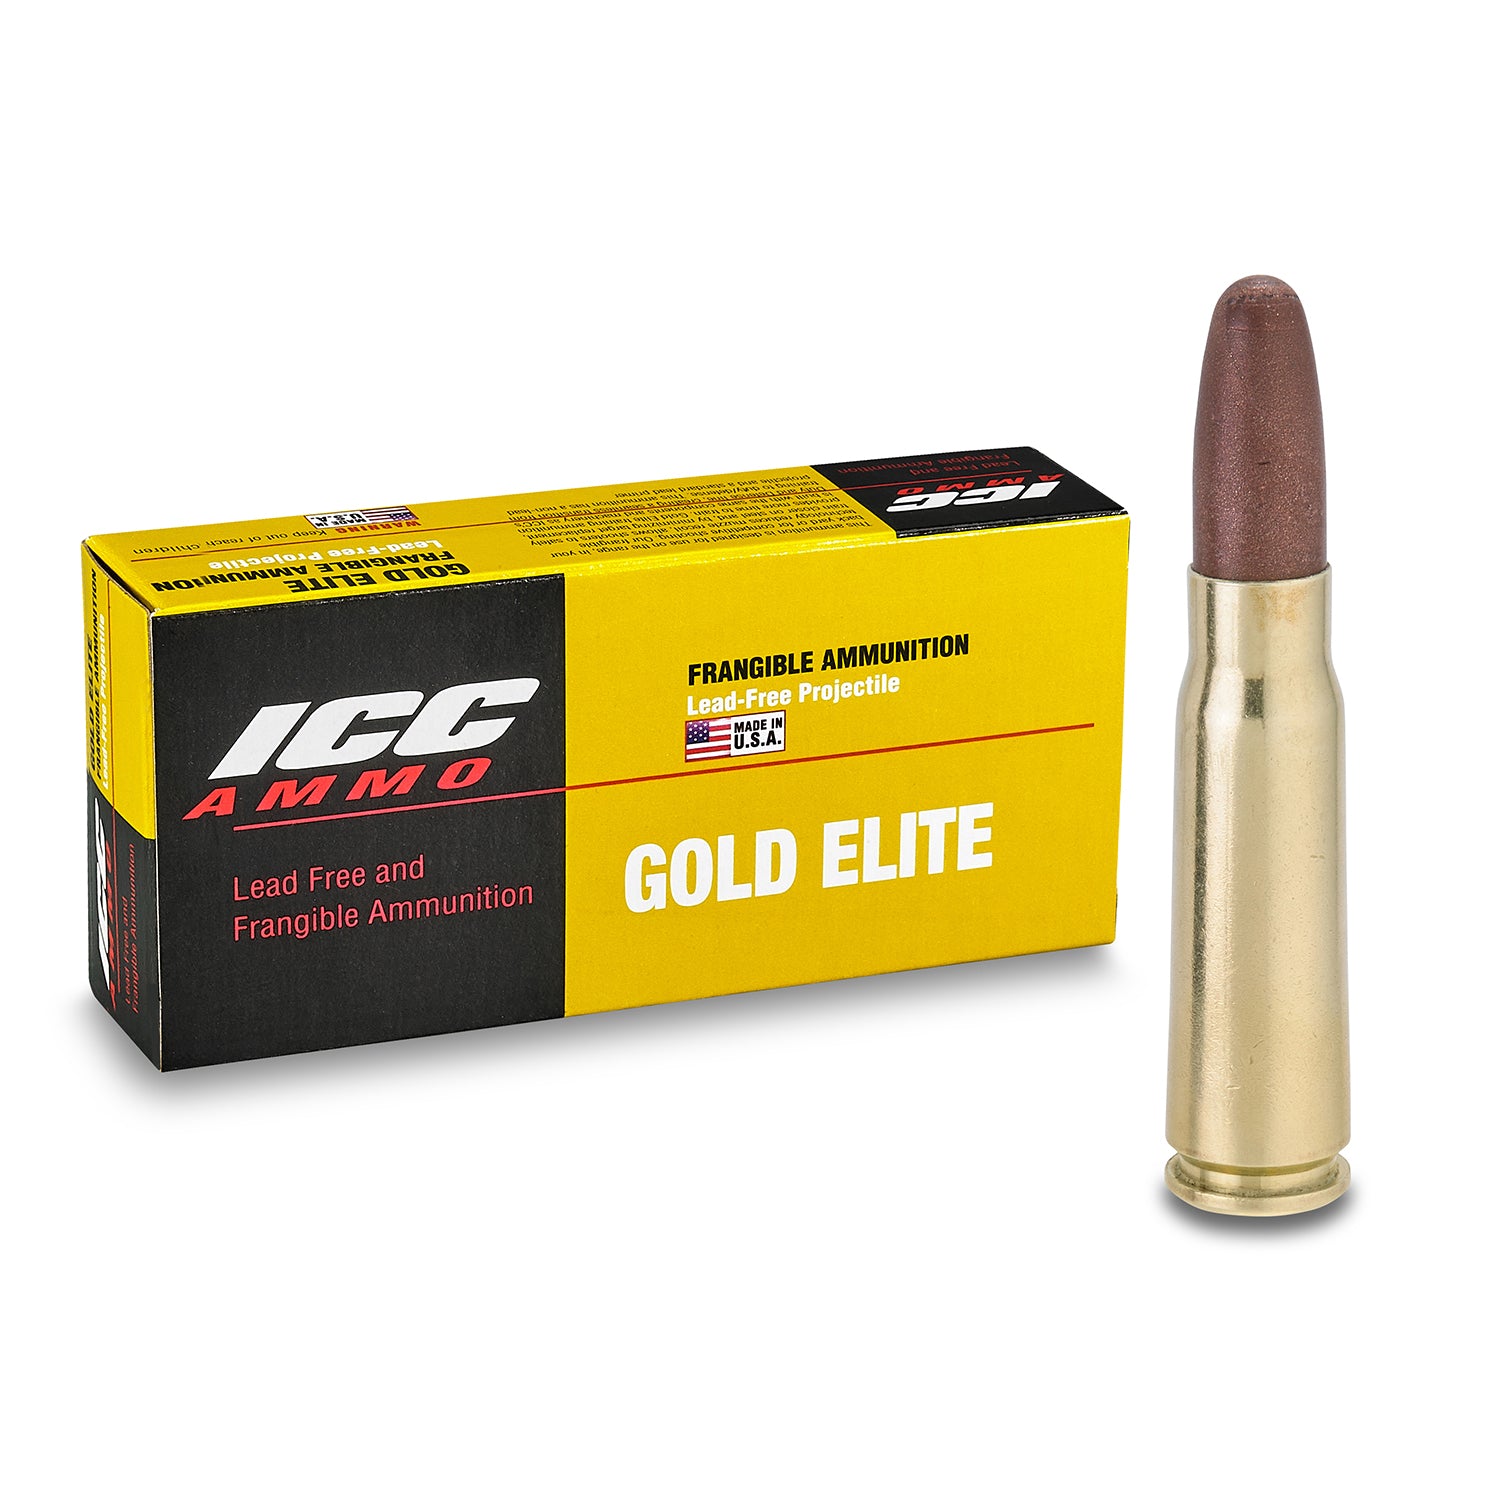 7.62 x 39mm 110 Grain Frangible Training (CASE OF 1000 ROUNDS)